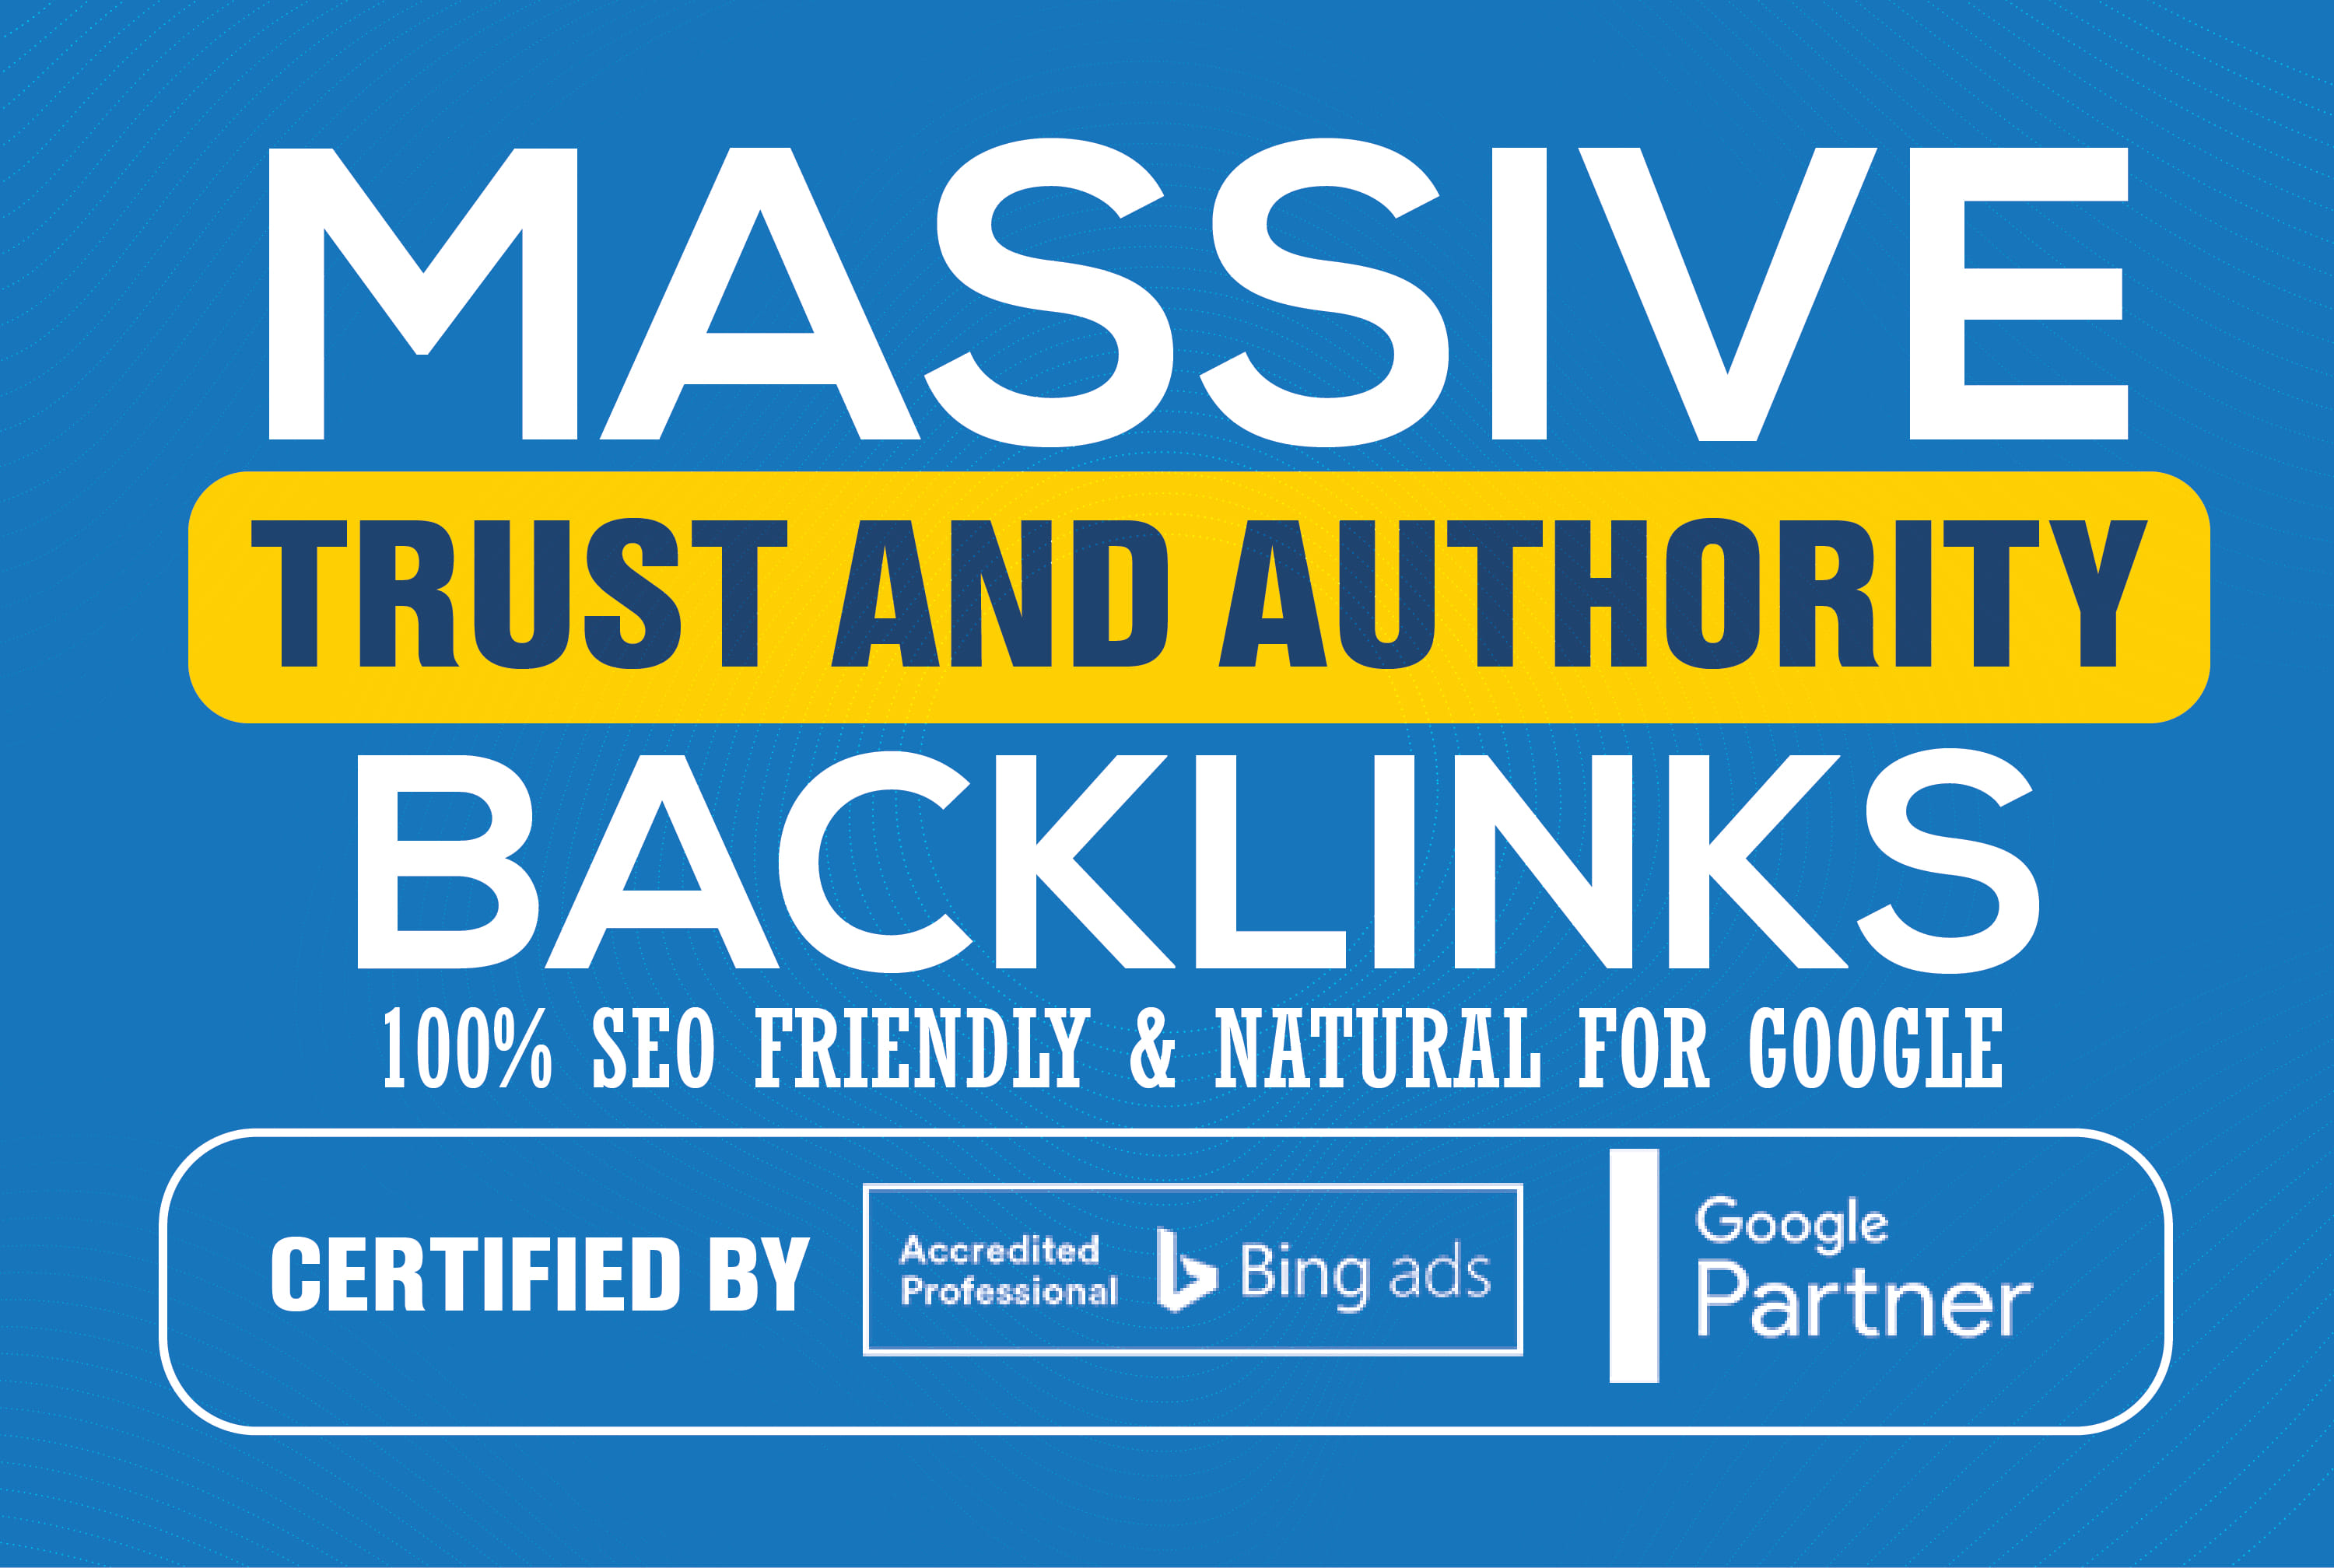 800 High Authority Backlinks to SUPERCHARGE your Google SEO + Two Articles+ Premium On-Site Analysis